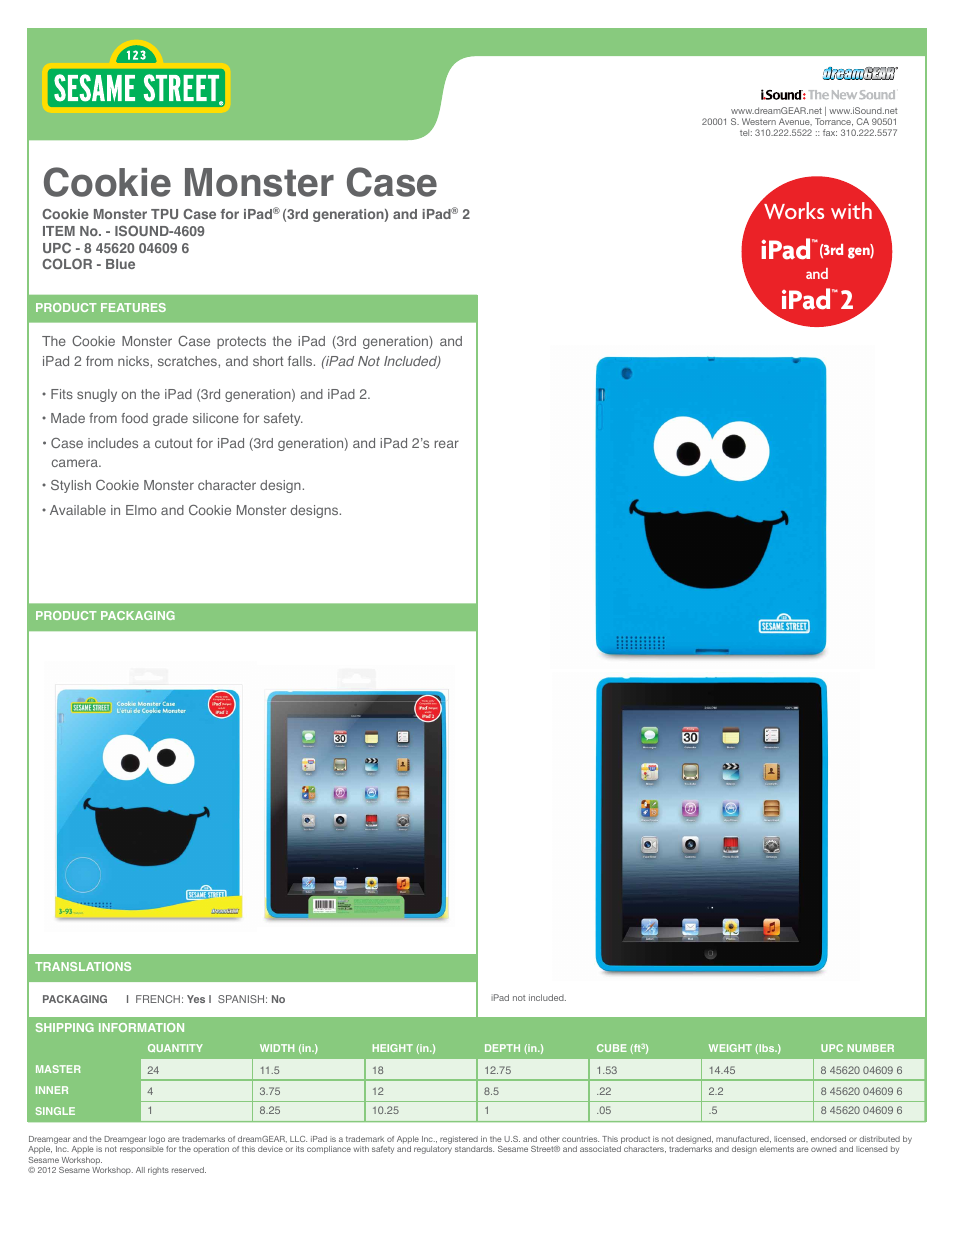 Cookie Monster TPU Case - Sell Sheet